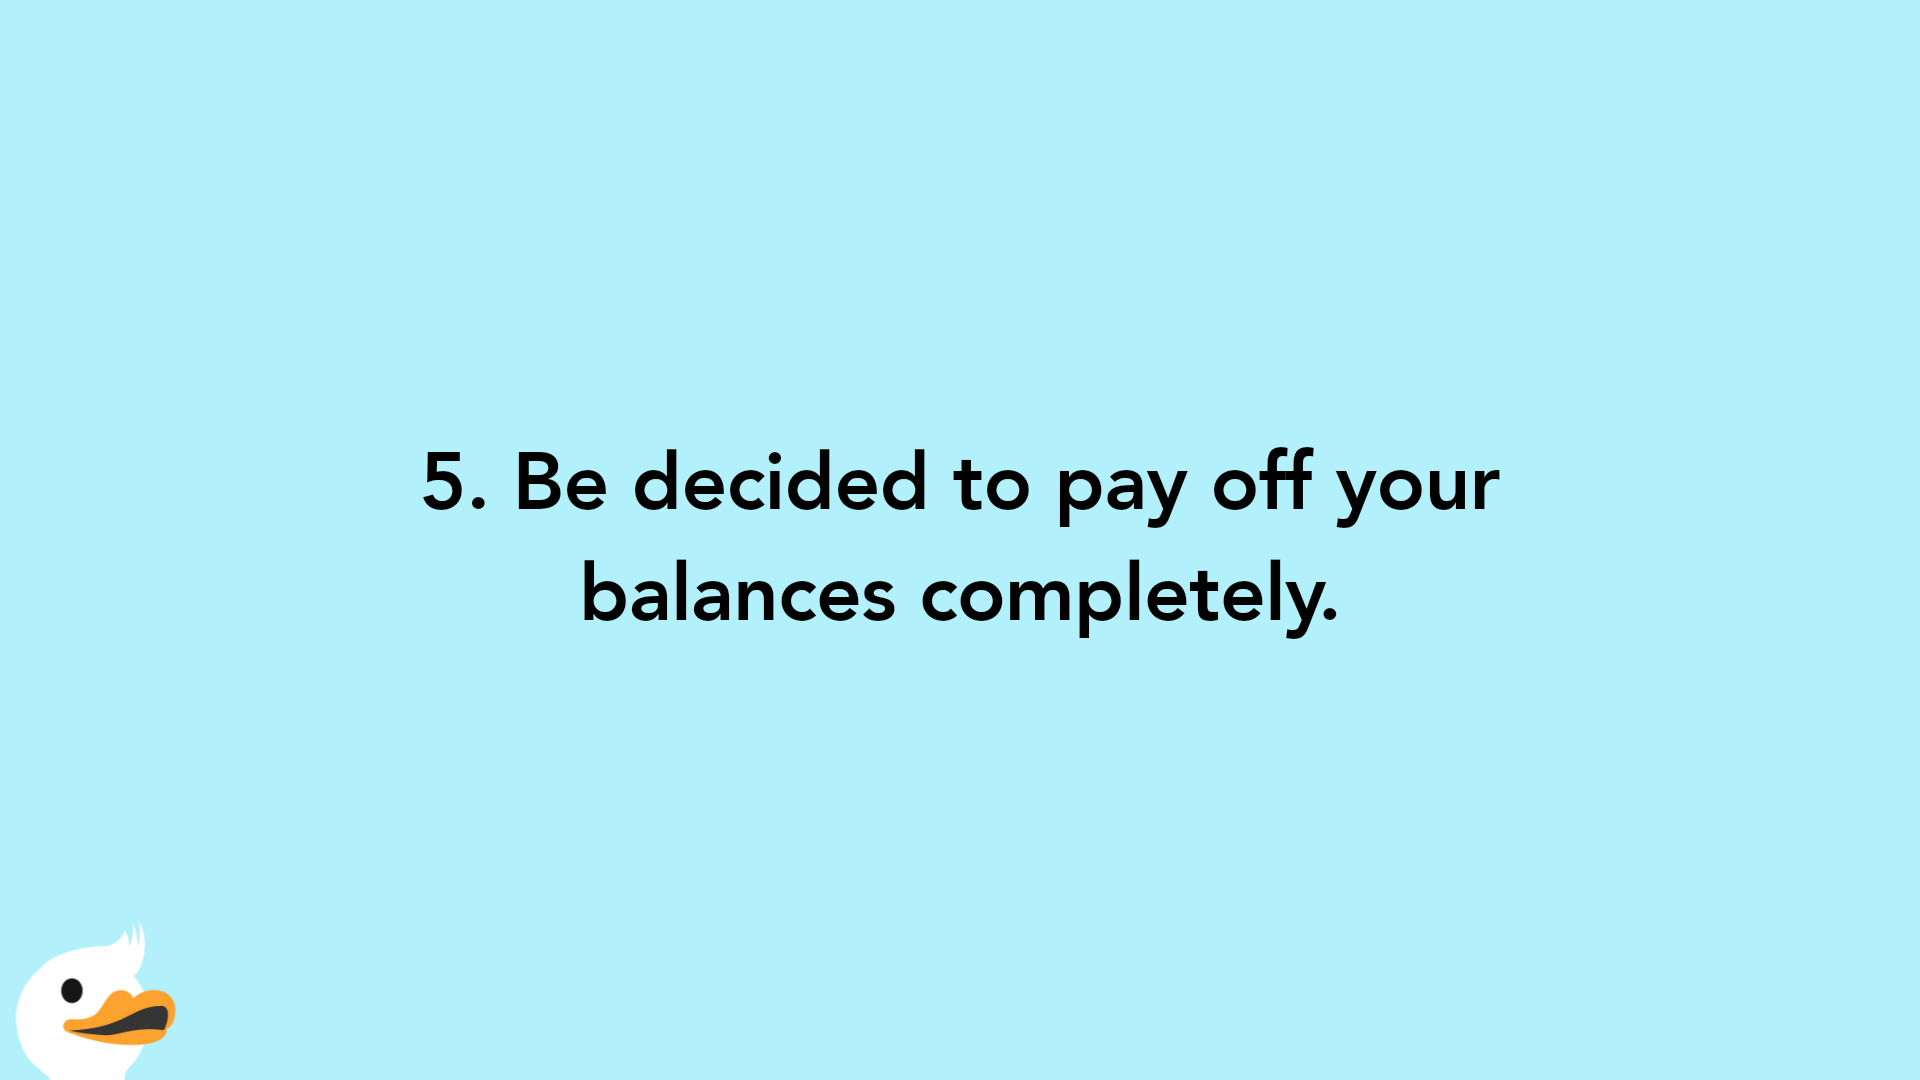 5. Be decided to pay off your balances completely.